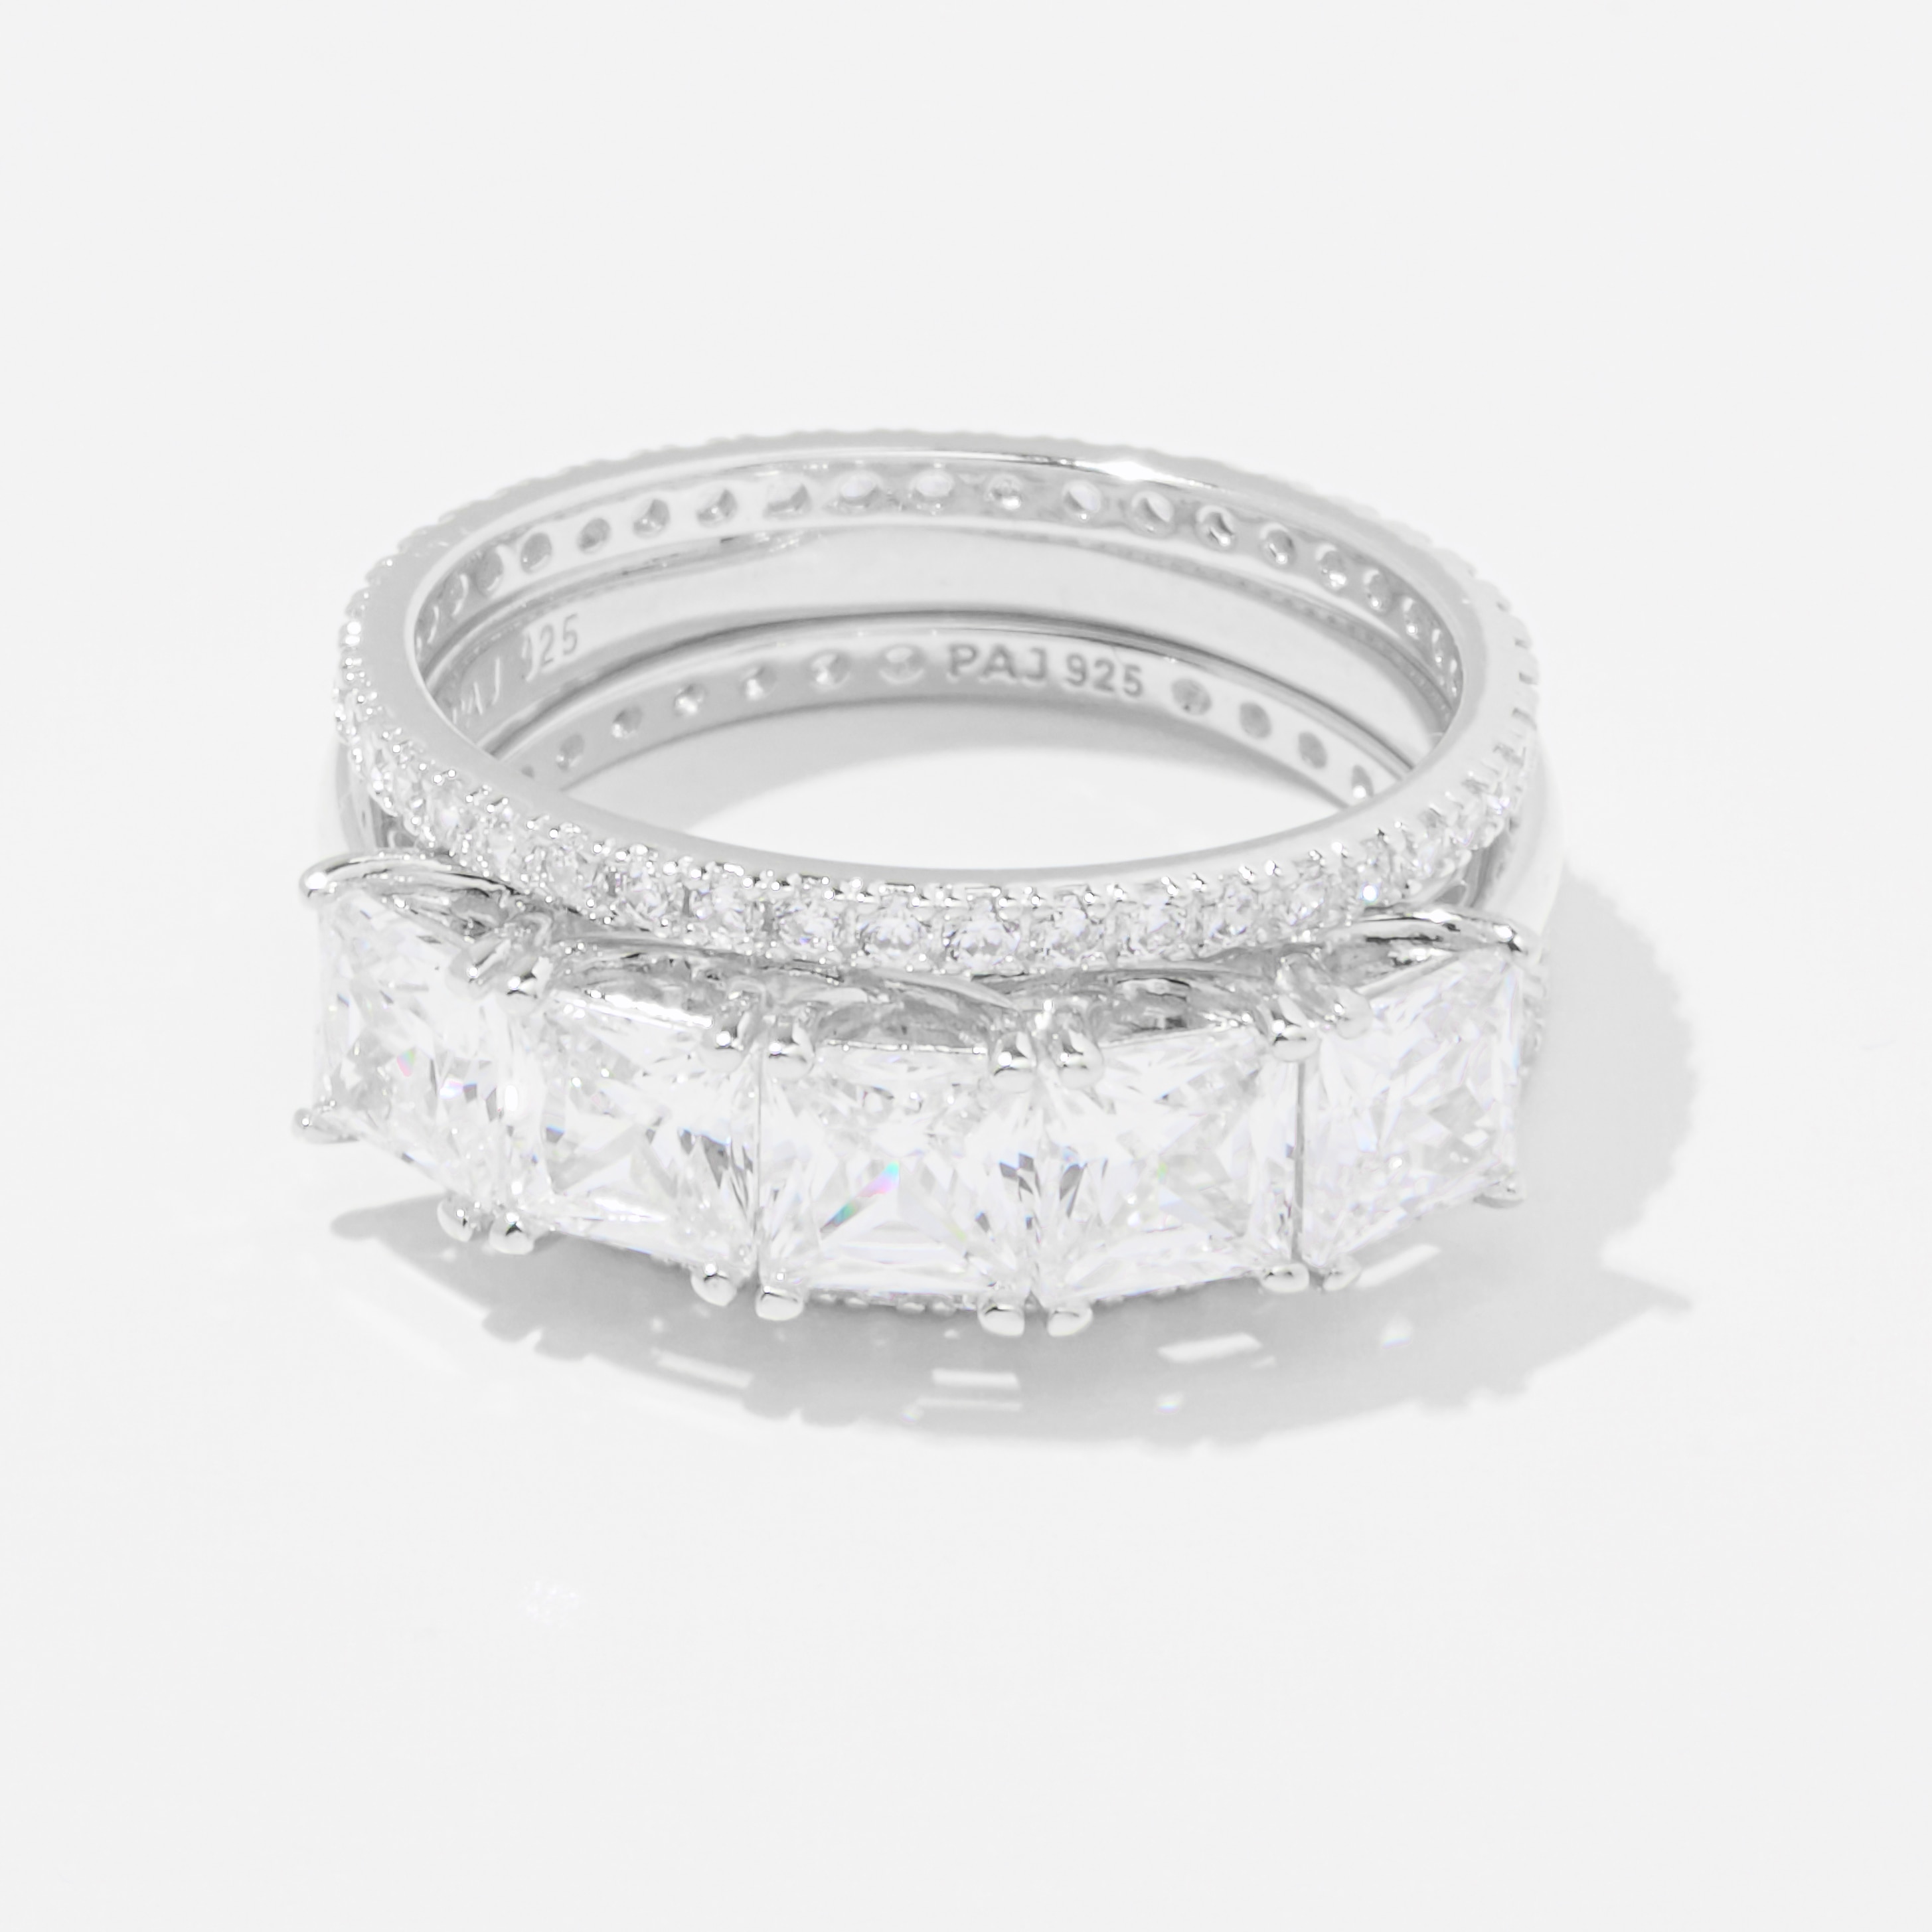 Diamonelle Sterling Silver Shaped Ring with Two Eternity Bands